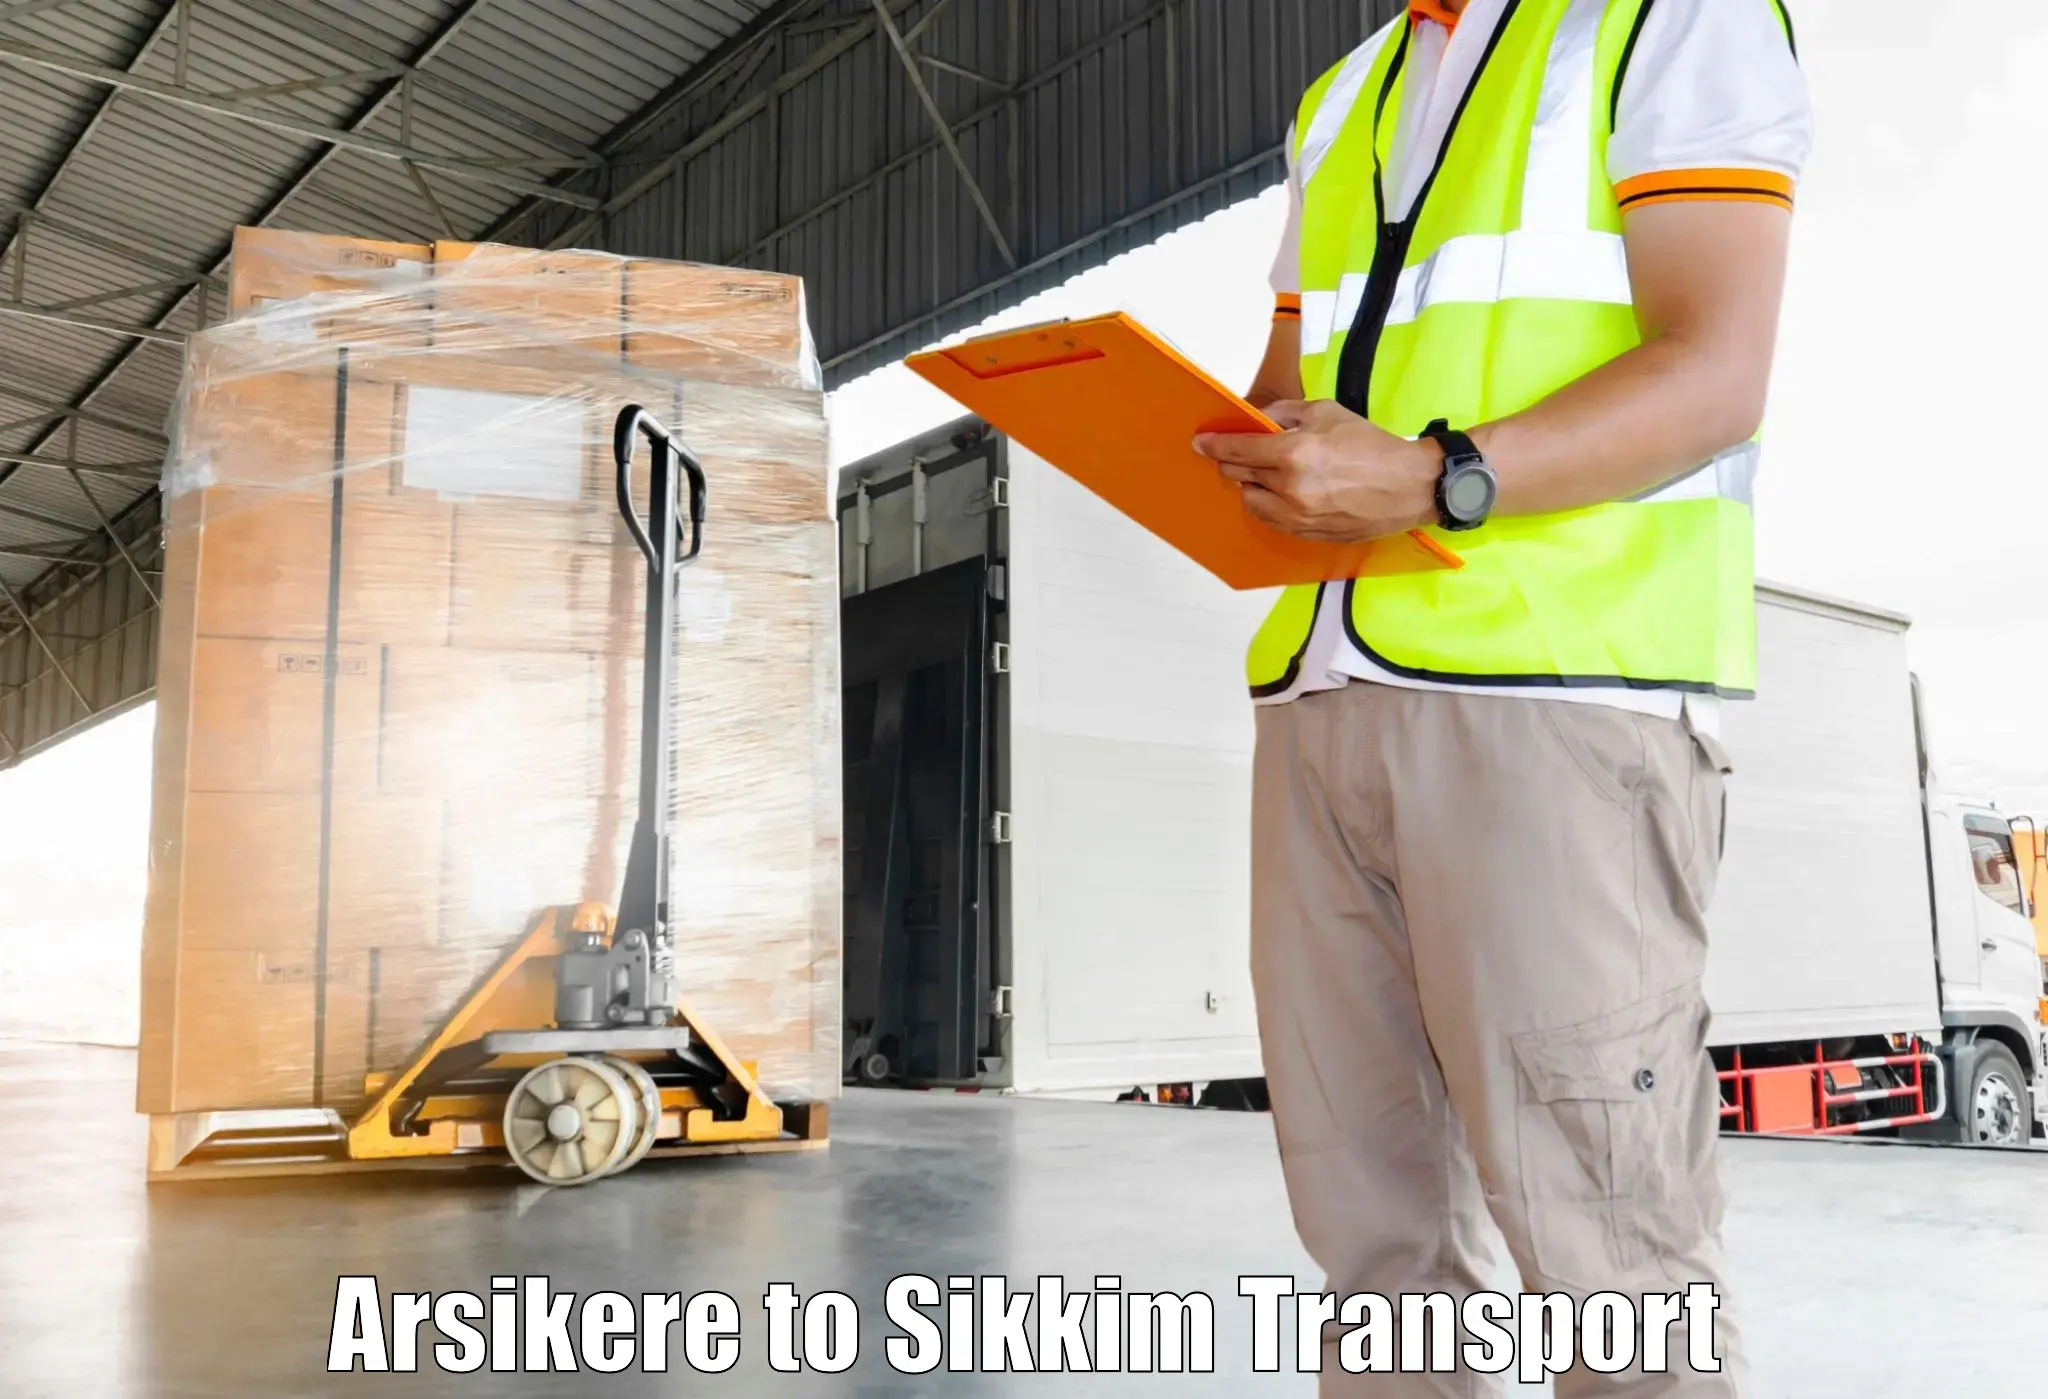 Container transport service Arsikere to Pelling